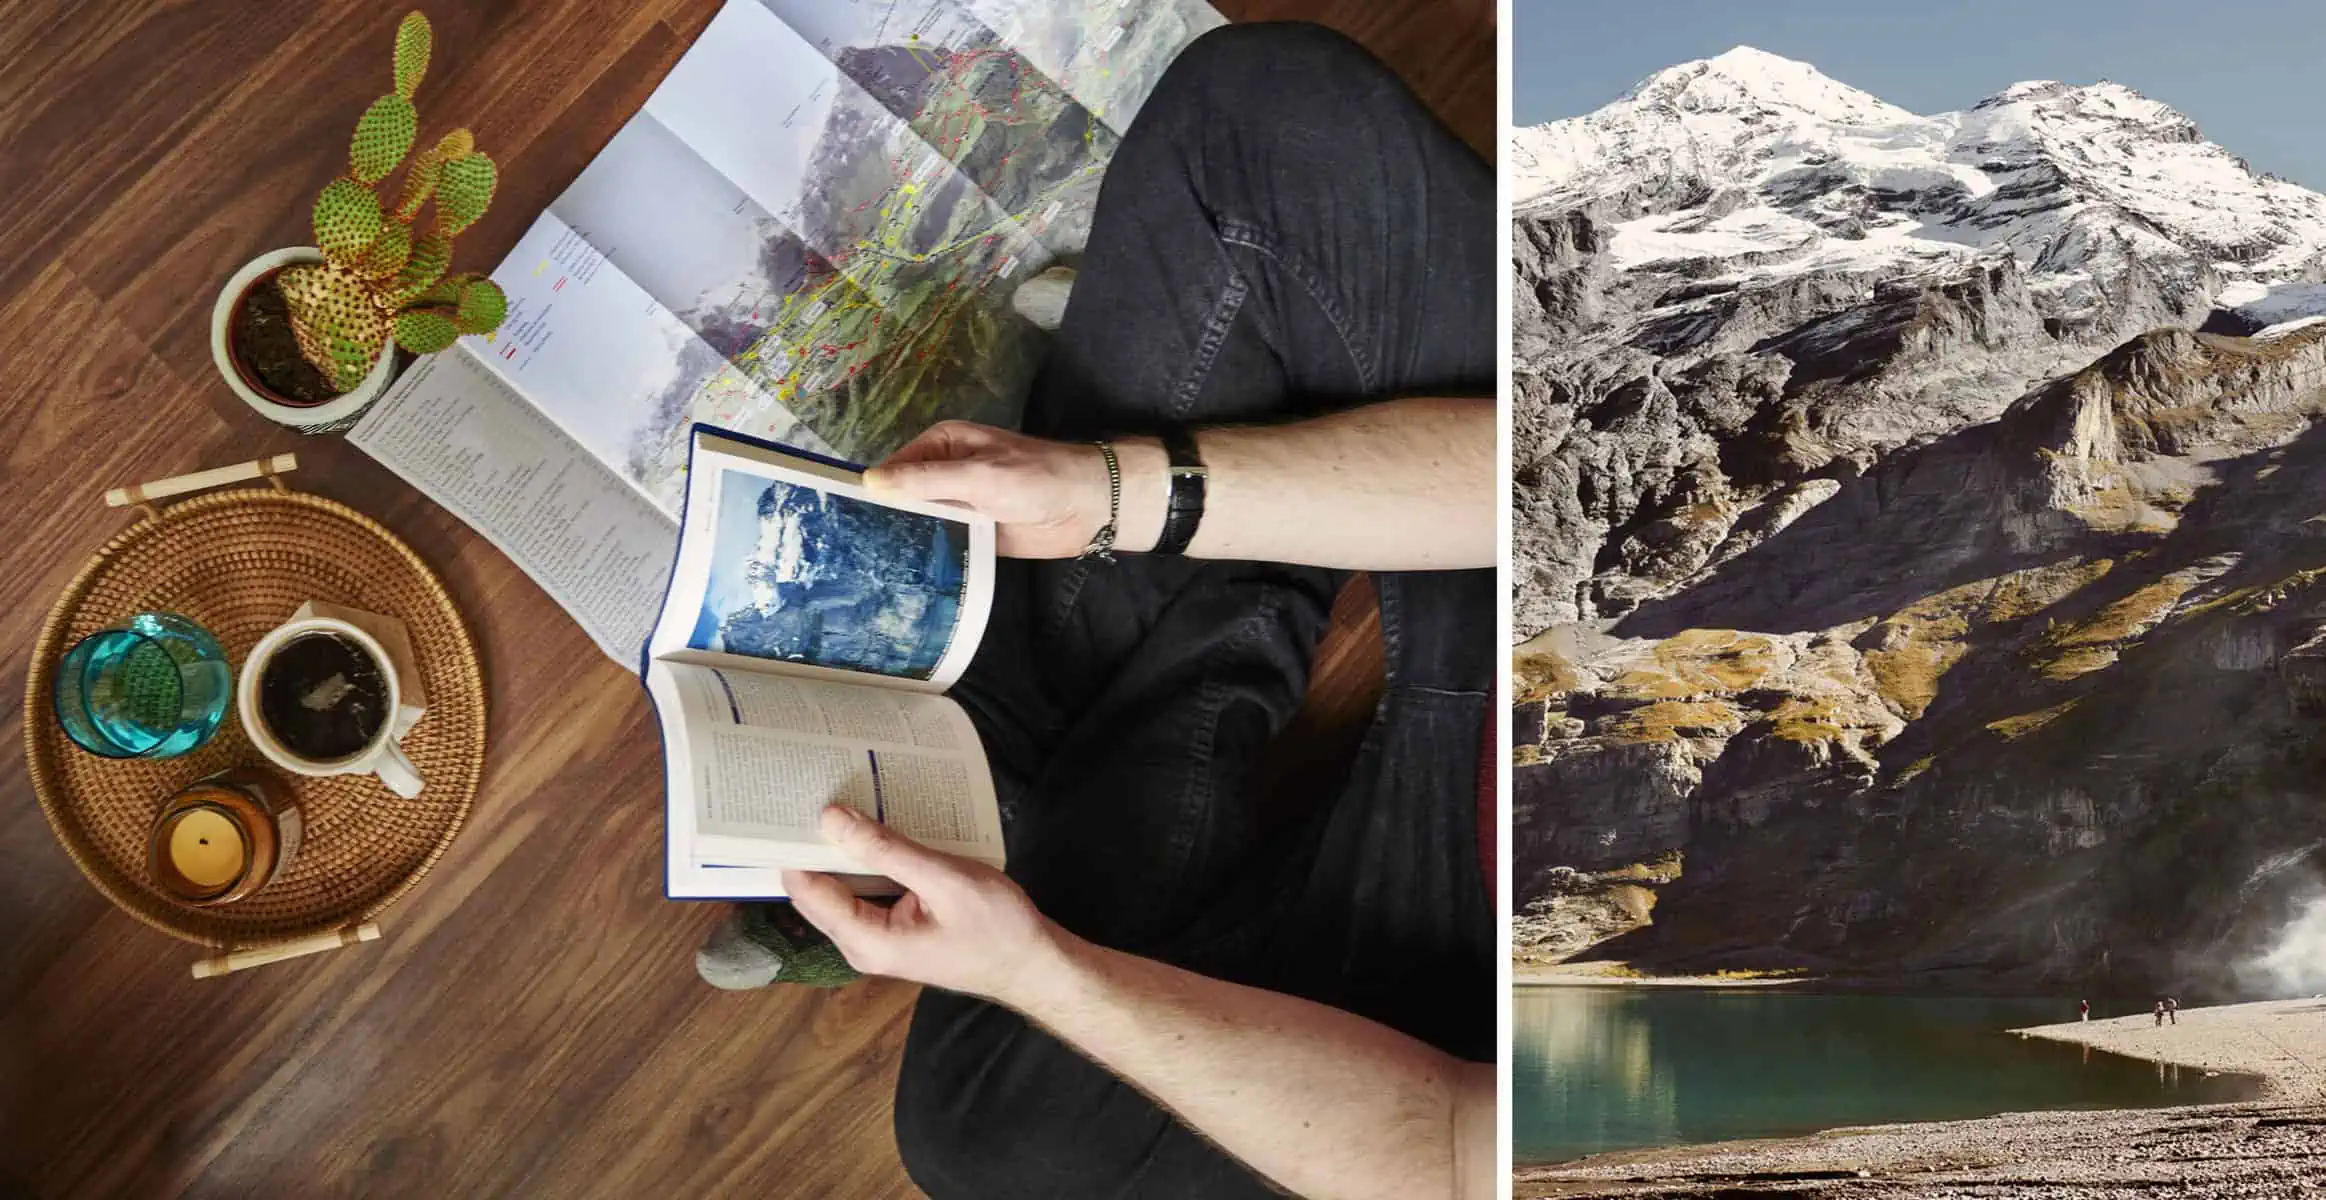 ID: from left to right. 1: a landscape image. A flatly looking down at Matt reading a guide book on the Bernese Alps, Switzerland. Around him are maps, a drink and a cactus. The floor is dark brown wood and the drink is blue, white mug with black co…